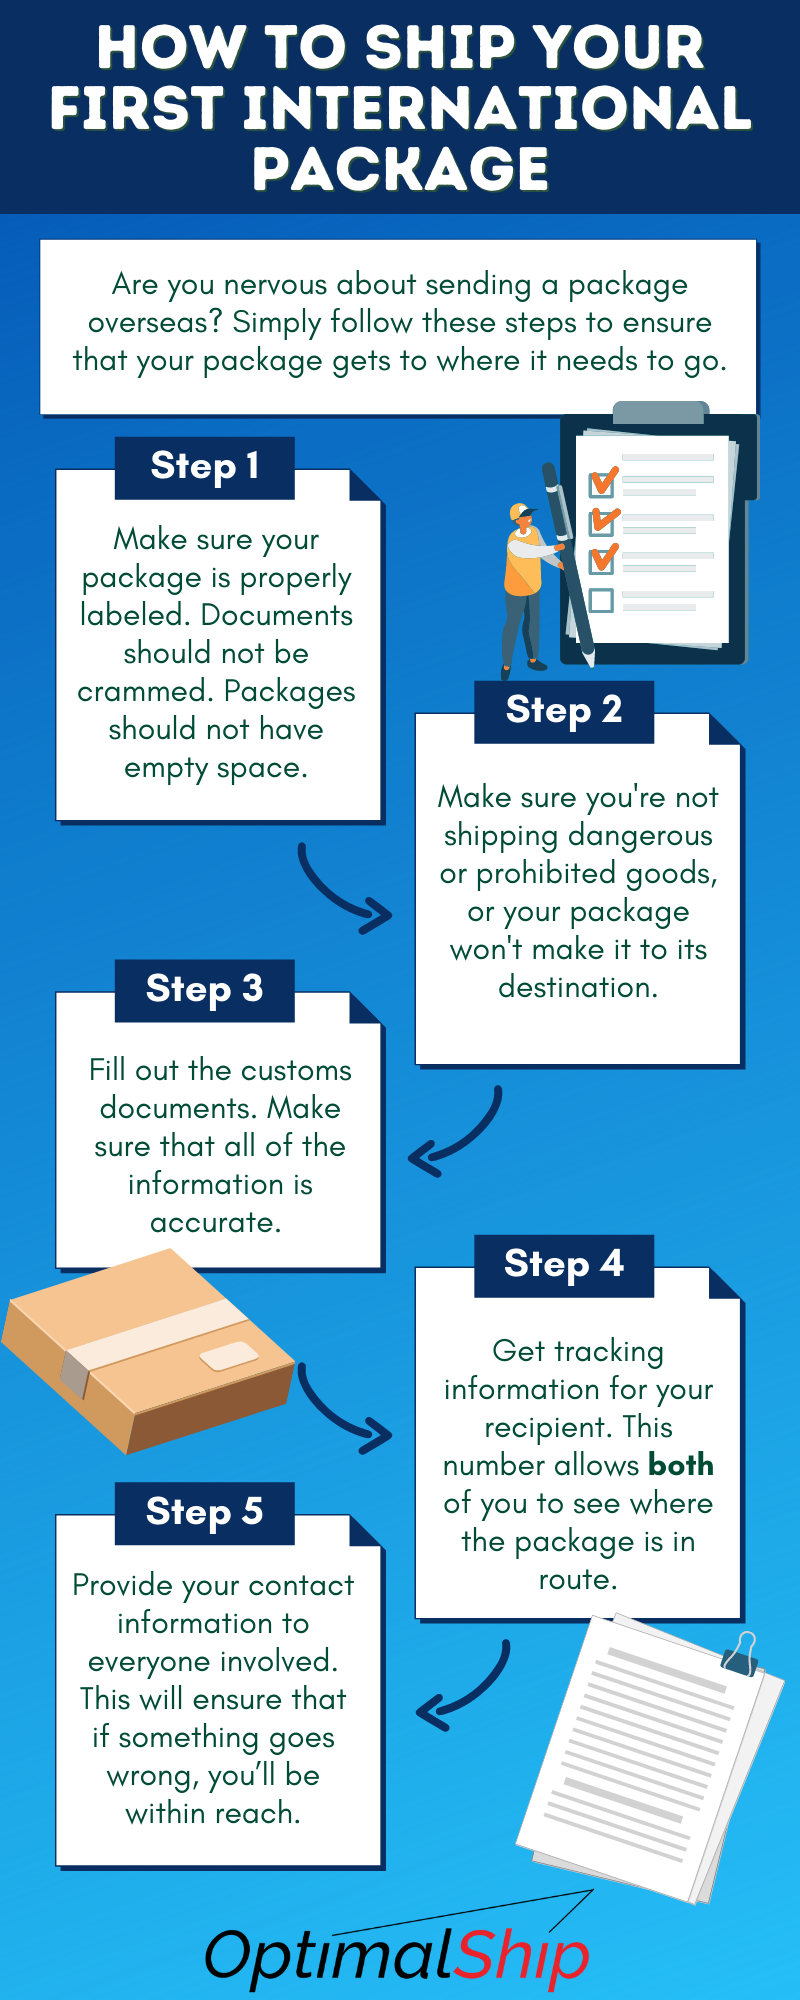 How to Ship Your First International Package